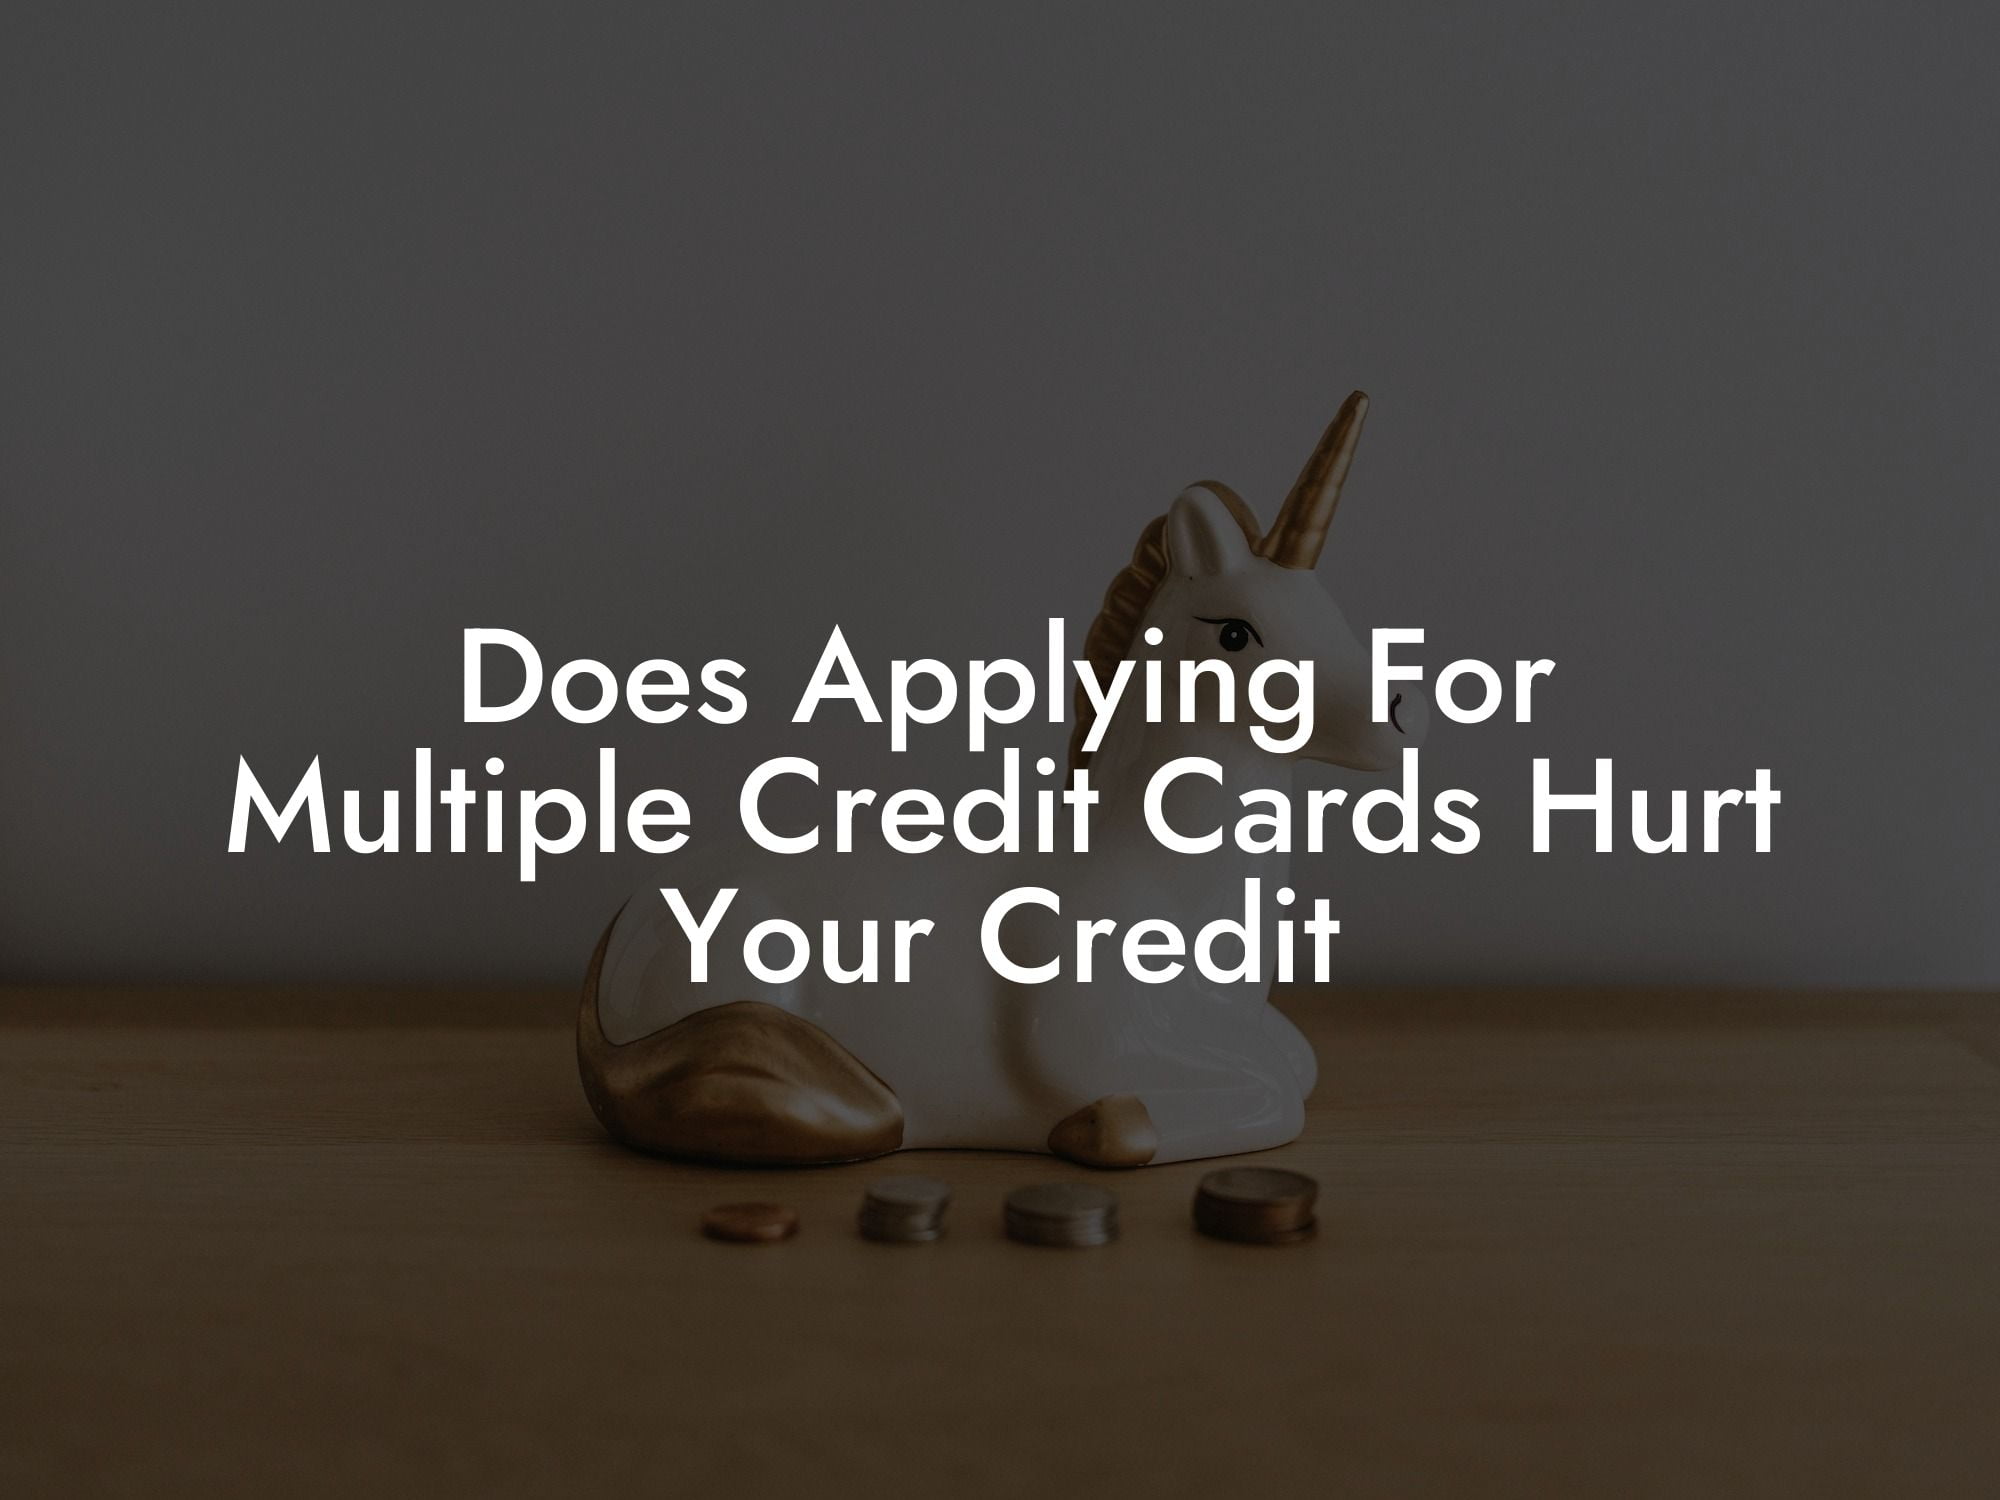 Does Applying For Multiple Credit Cards Hurt Your Credit